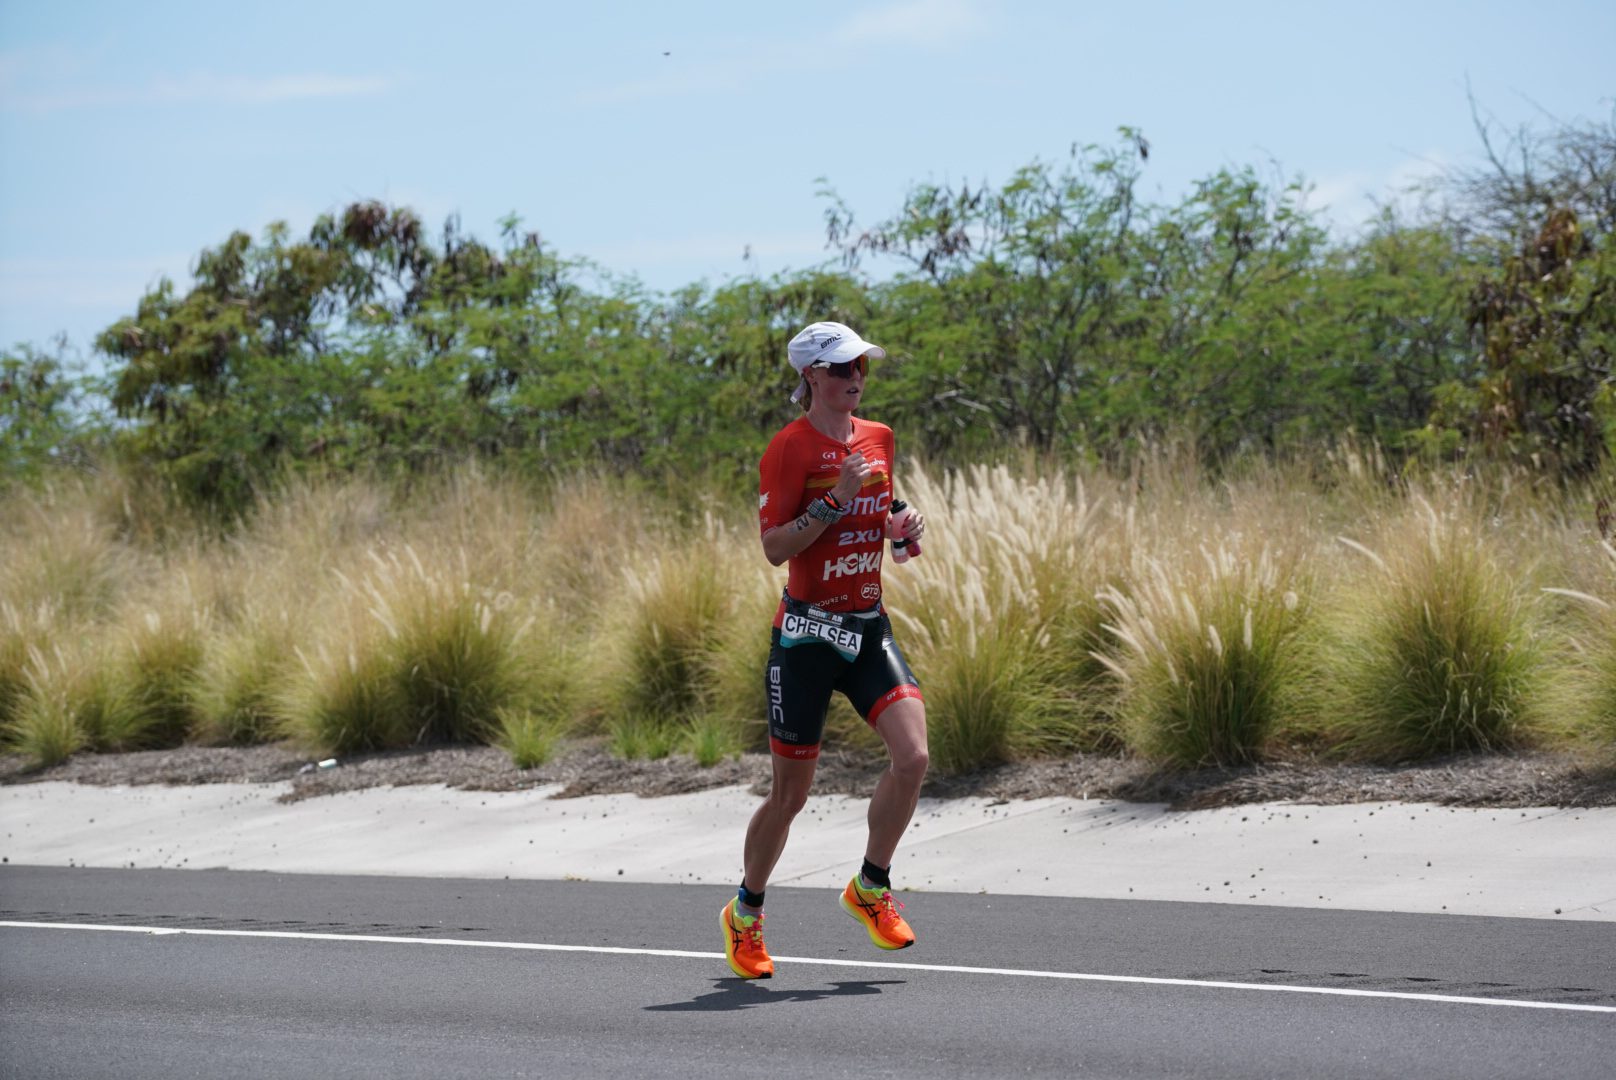 Wrapping up Kona: The Life of Tri Podcast looks at the races that mark a new era of Ironman